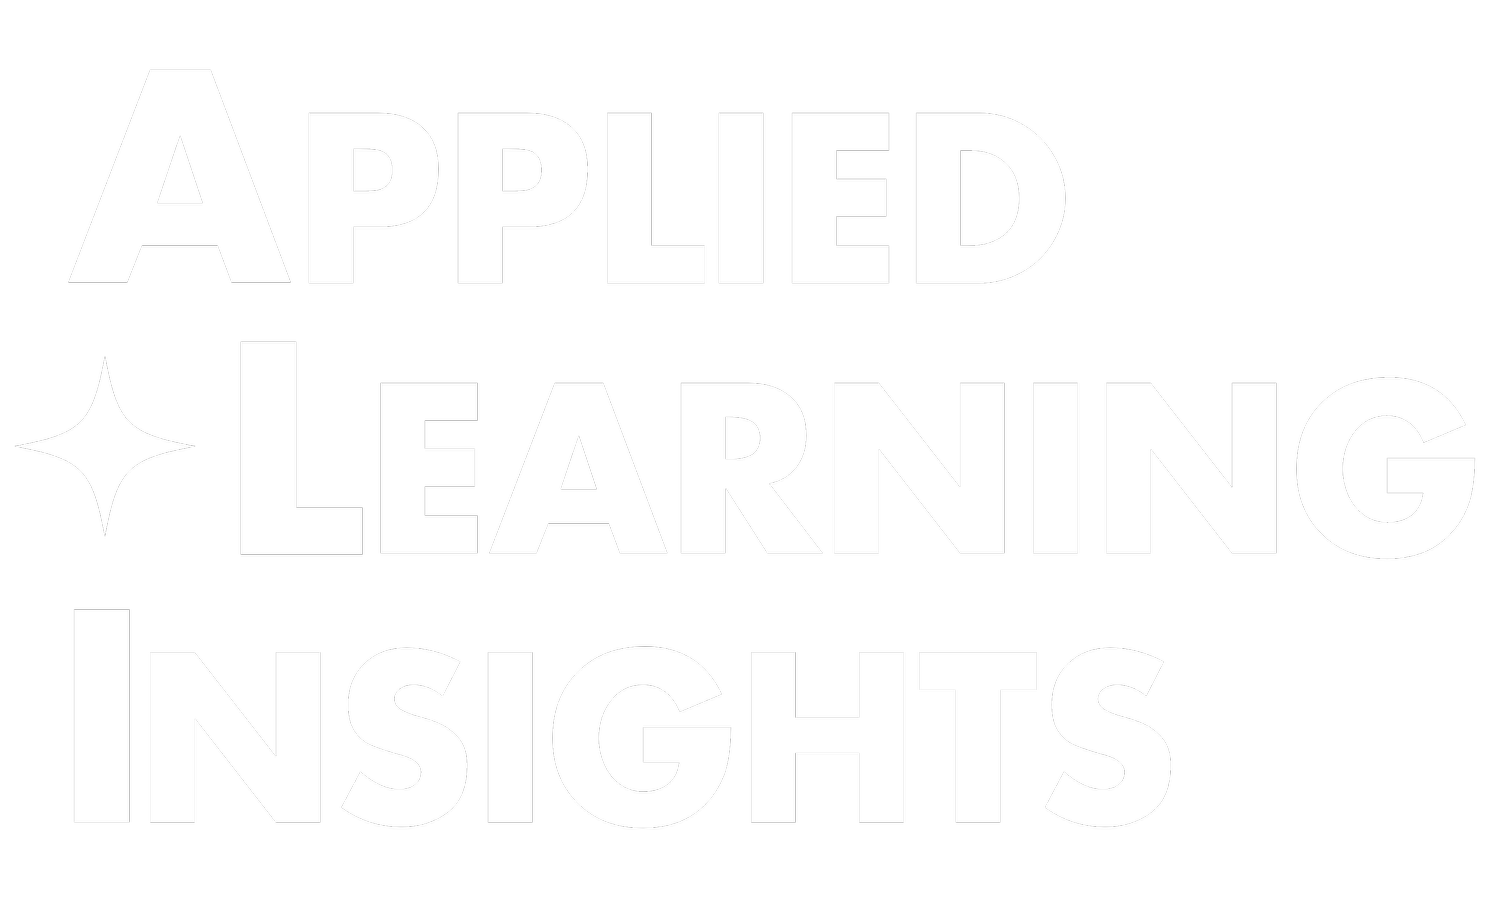 Applied Learning Insights